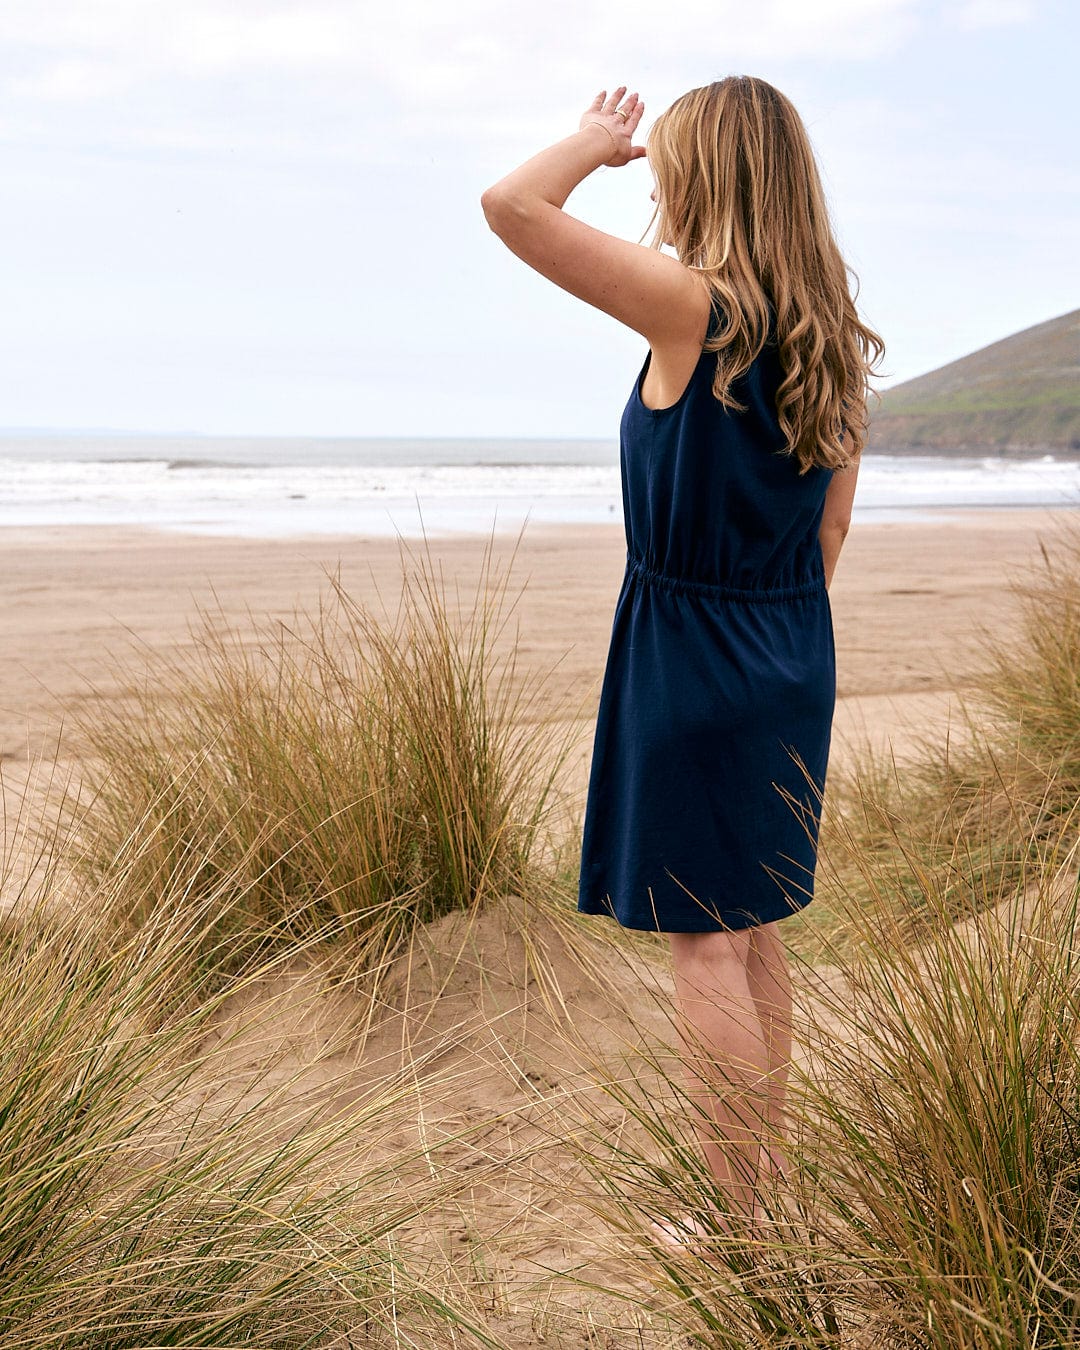 A woman is standing on a beach looking at the ocean wearing the Saltrock Flax - Womens Tie Vest Dress - Blue.